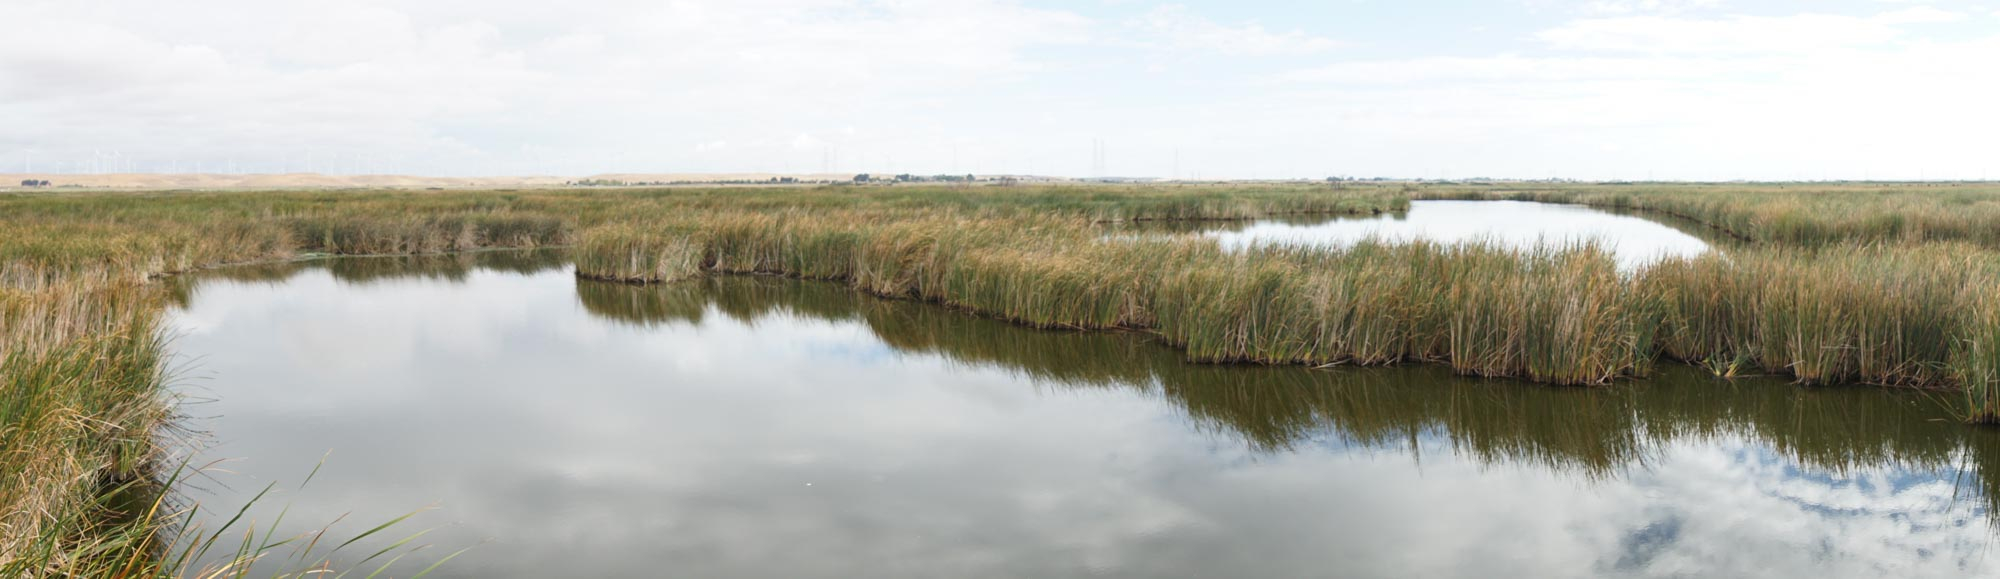 View of delta with water and grasses